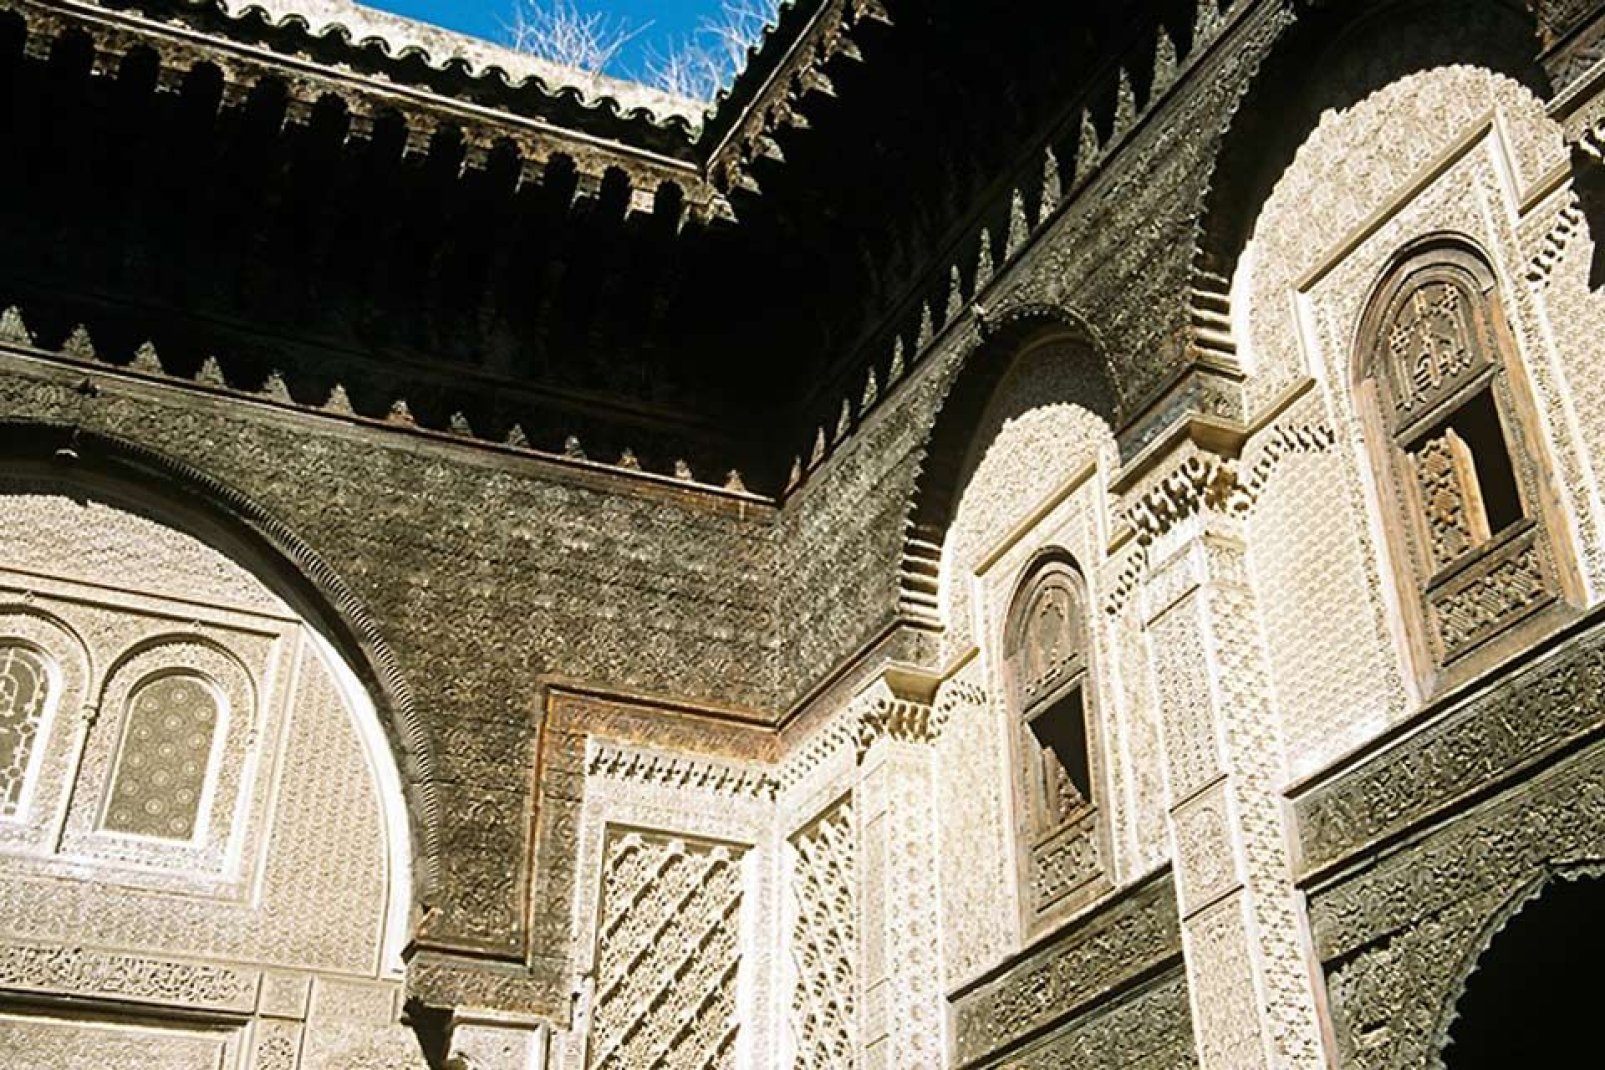 Al Mhancha, the royal palace in Meknes, was built at the beginning of the 18th century and is located in the middle of the Ismaili kasbah.